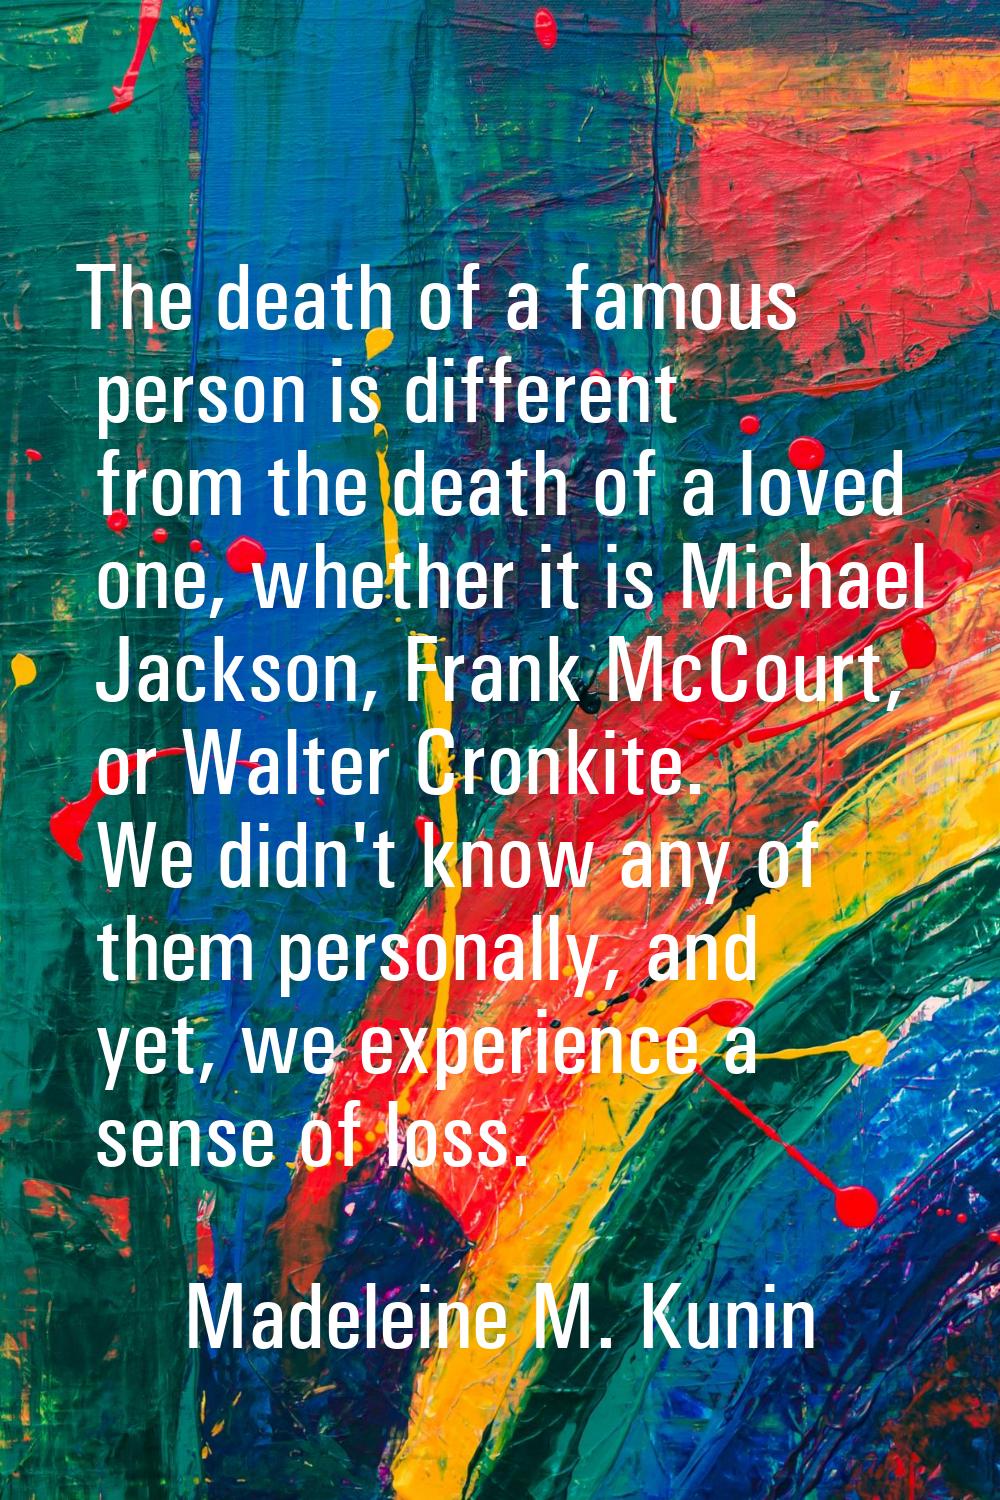 The death of a famous person is different from the death of a loved one, whether it is Michael Jack